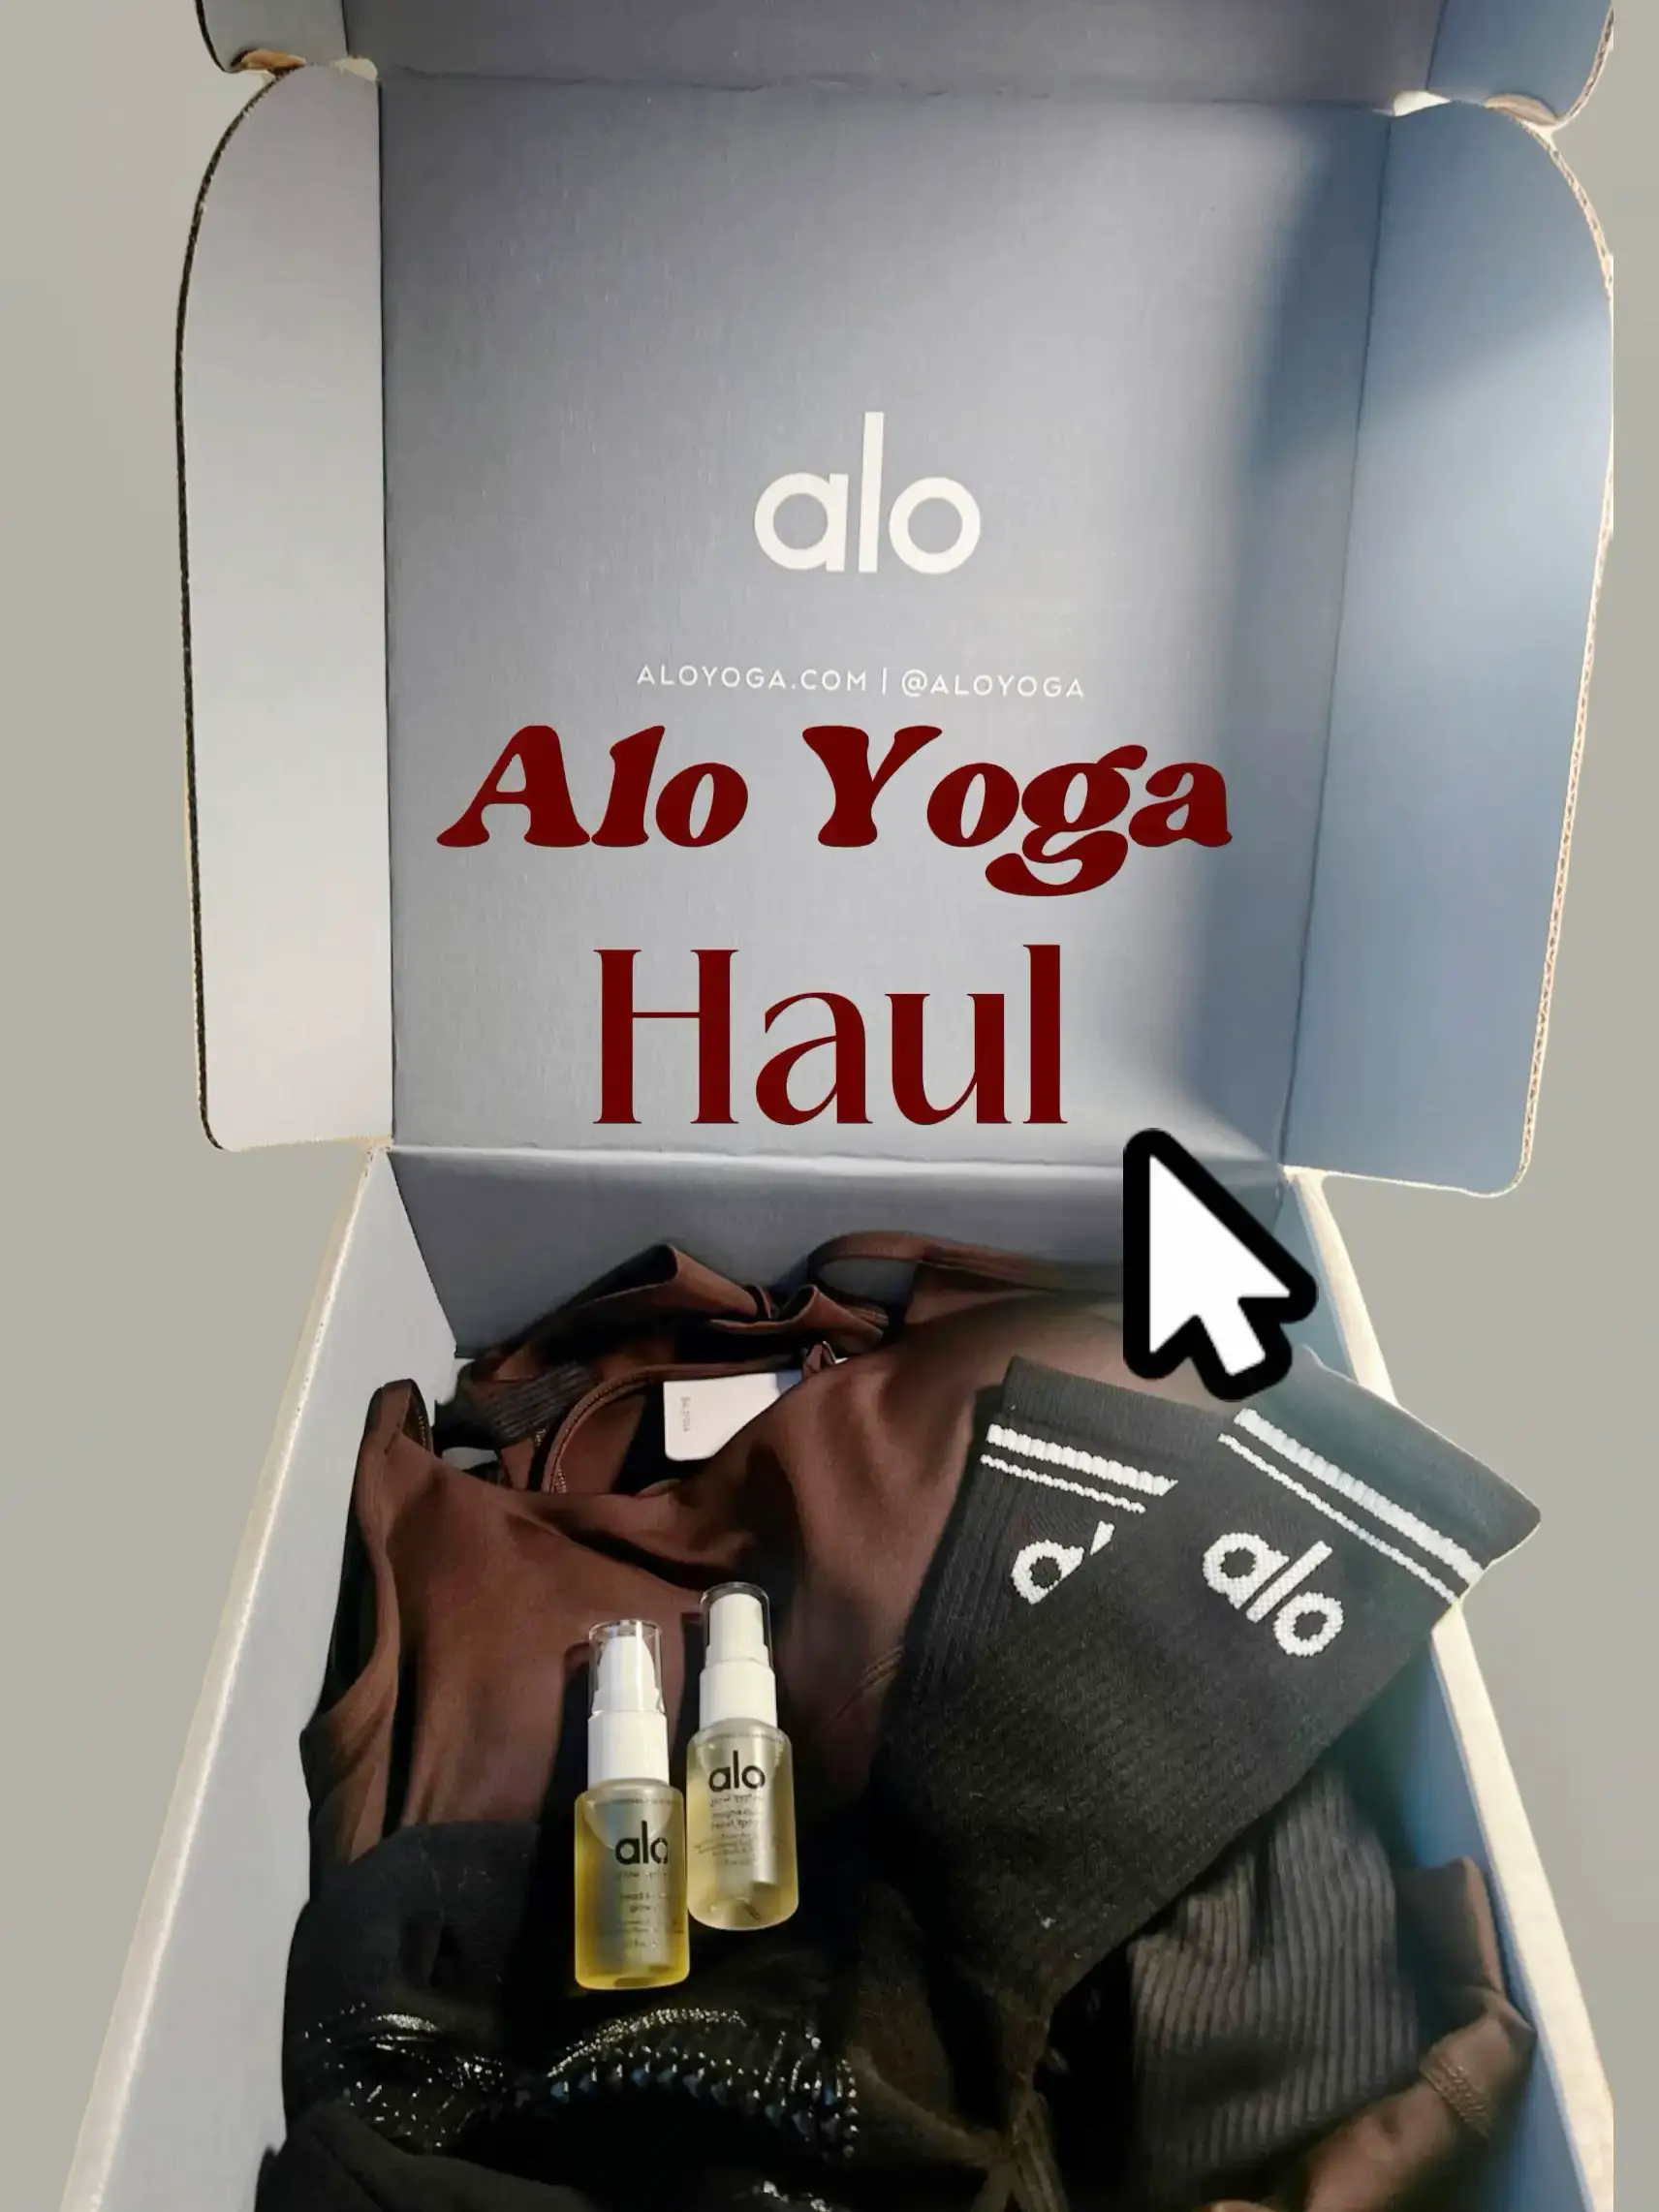 Highlight of my week: Unboxing my Alo Yoga package fresh from ALO